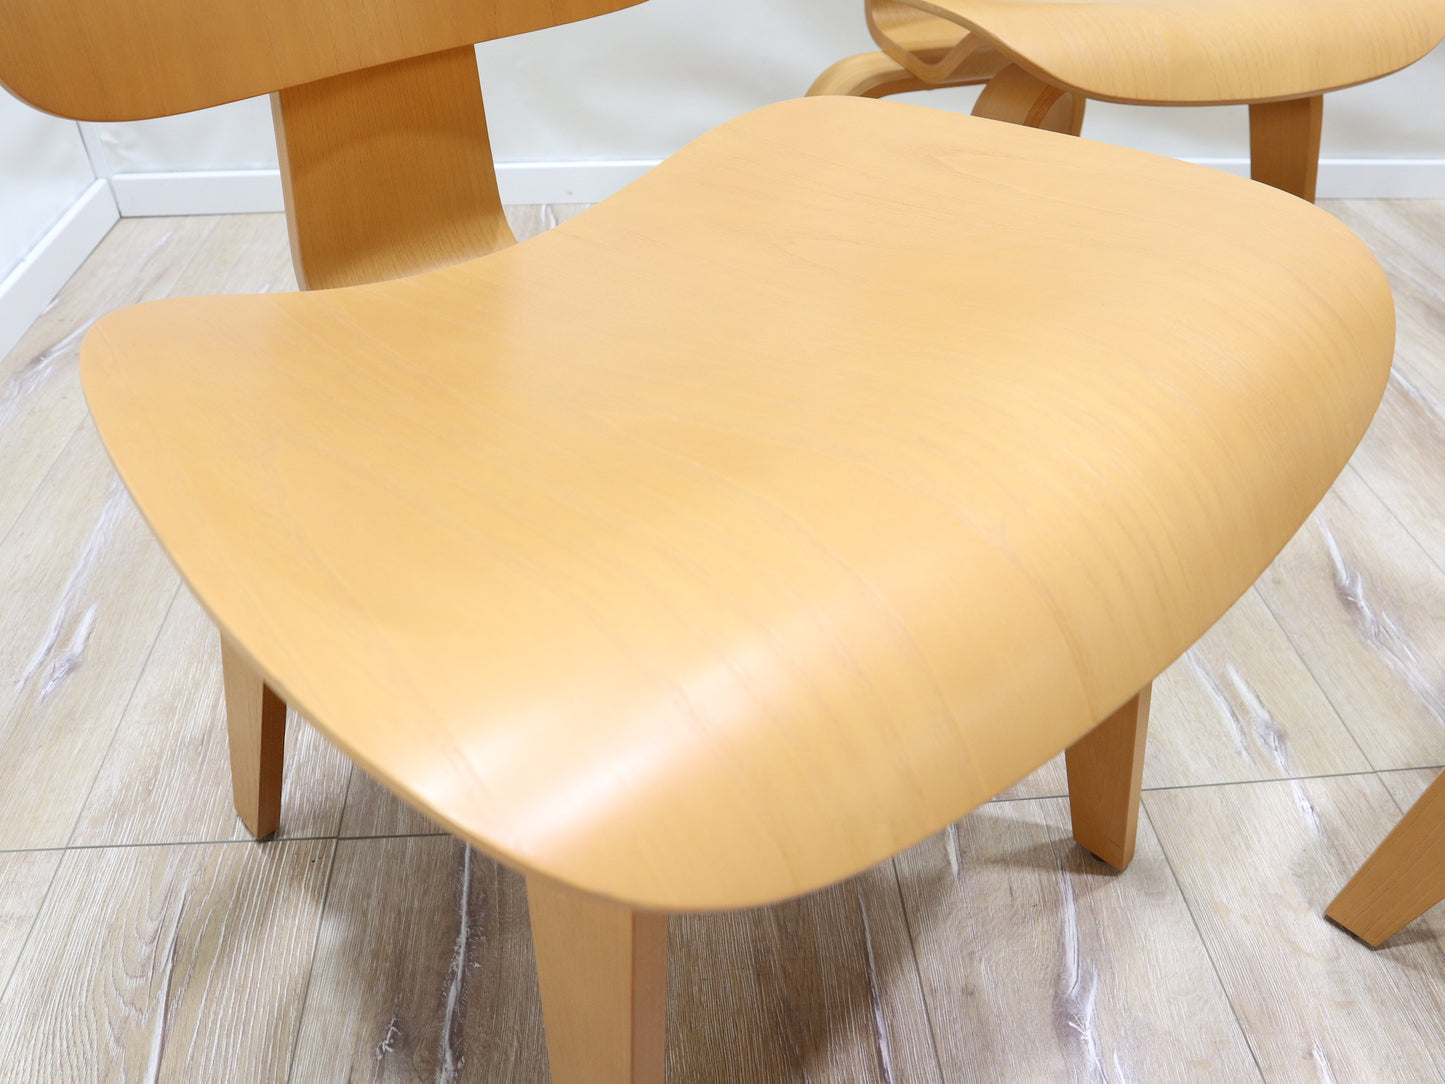 Vitra Plywood Group DCW